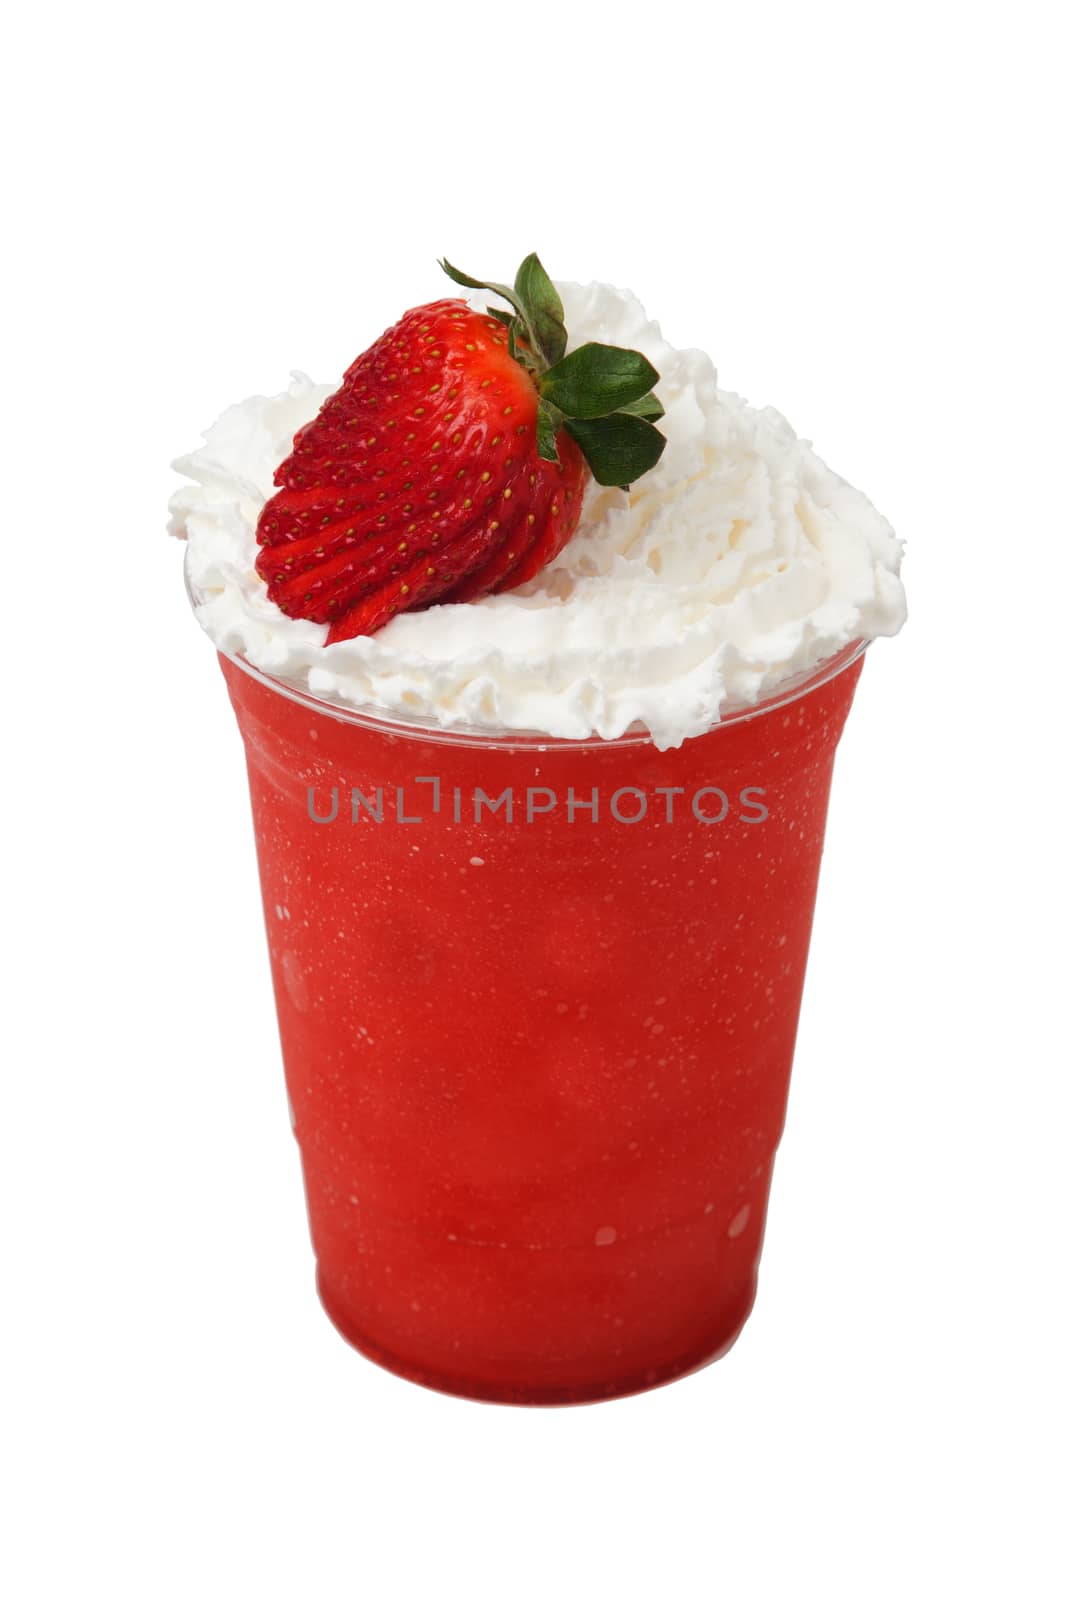 Generic frozen strawberry drink with whipped cream. Isolated on white.